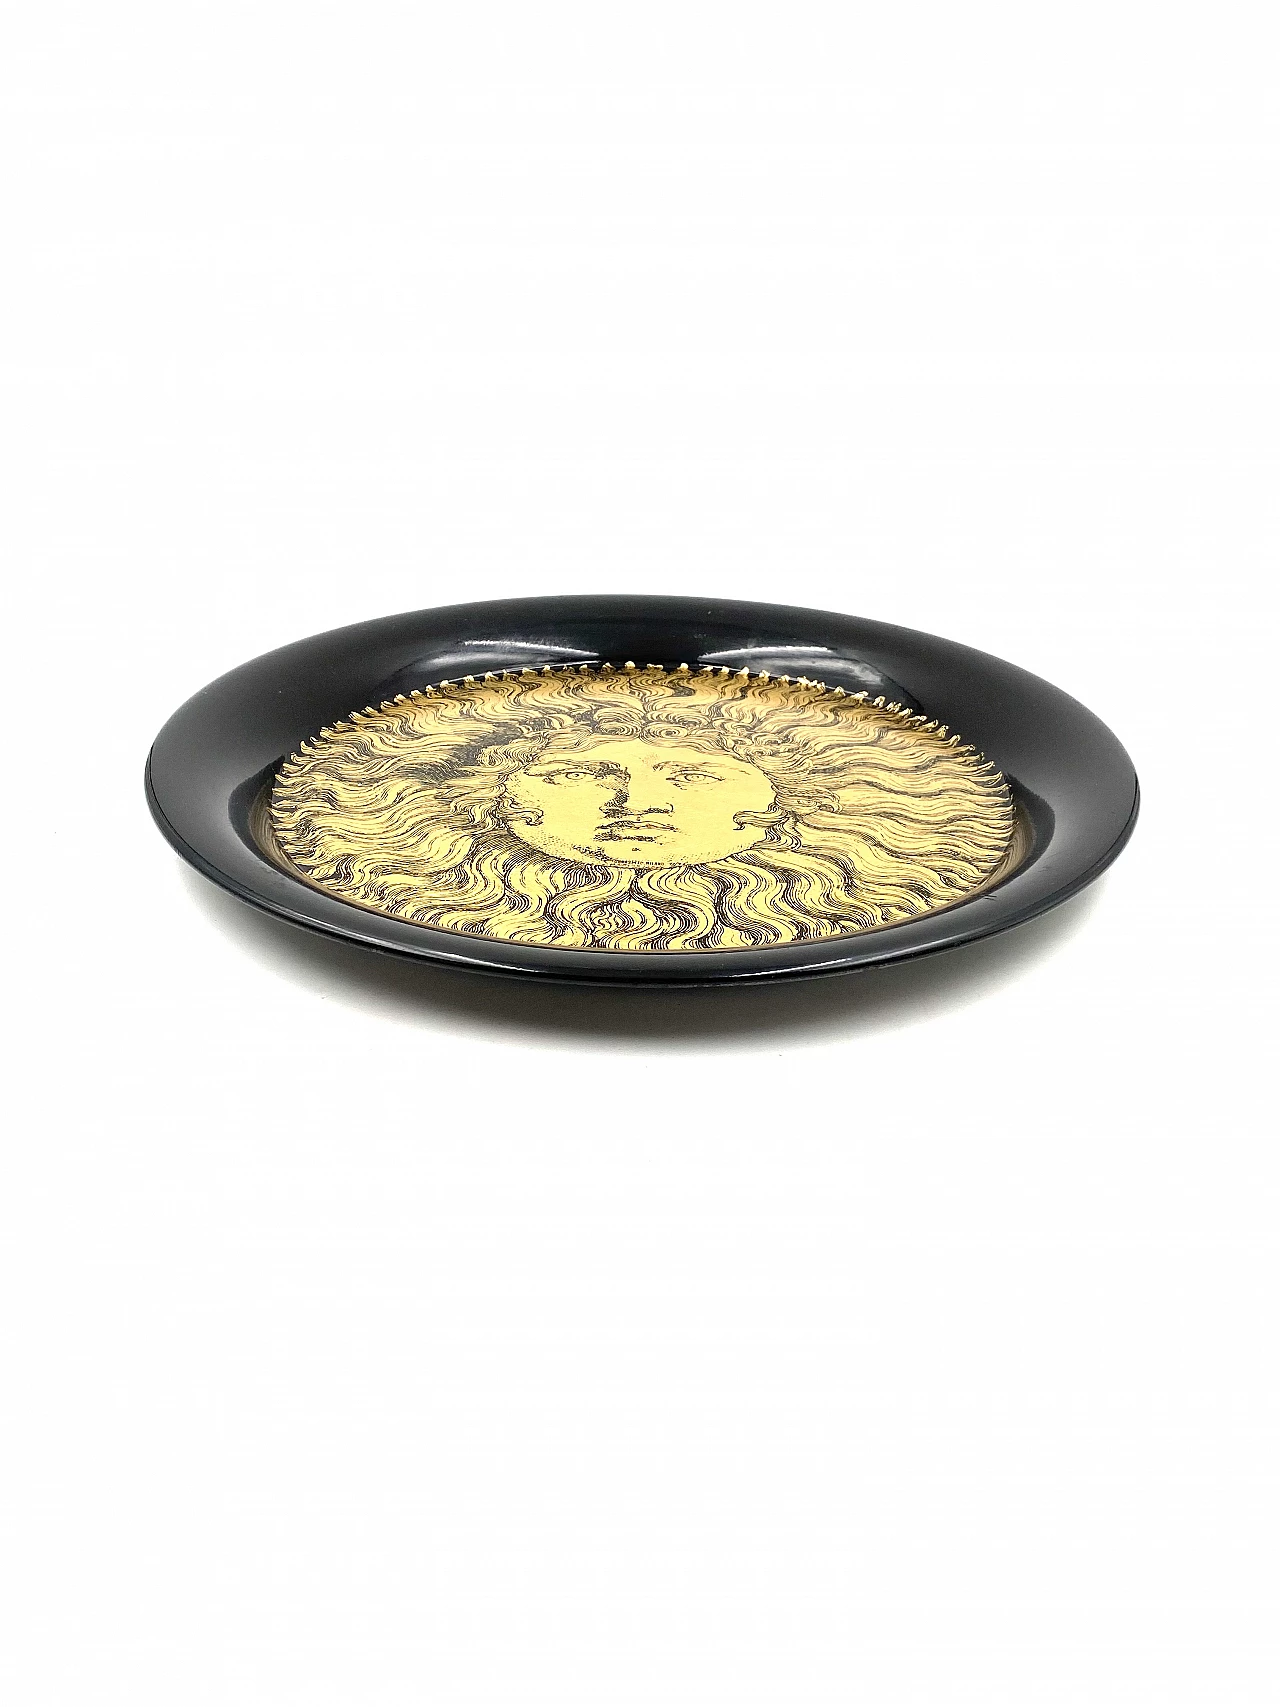 Metal Re Sole tray by Piero Fornasetti, 1950s 9